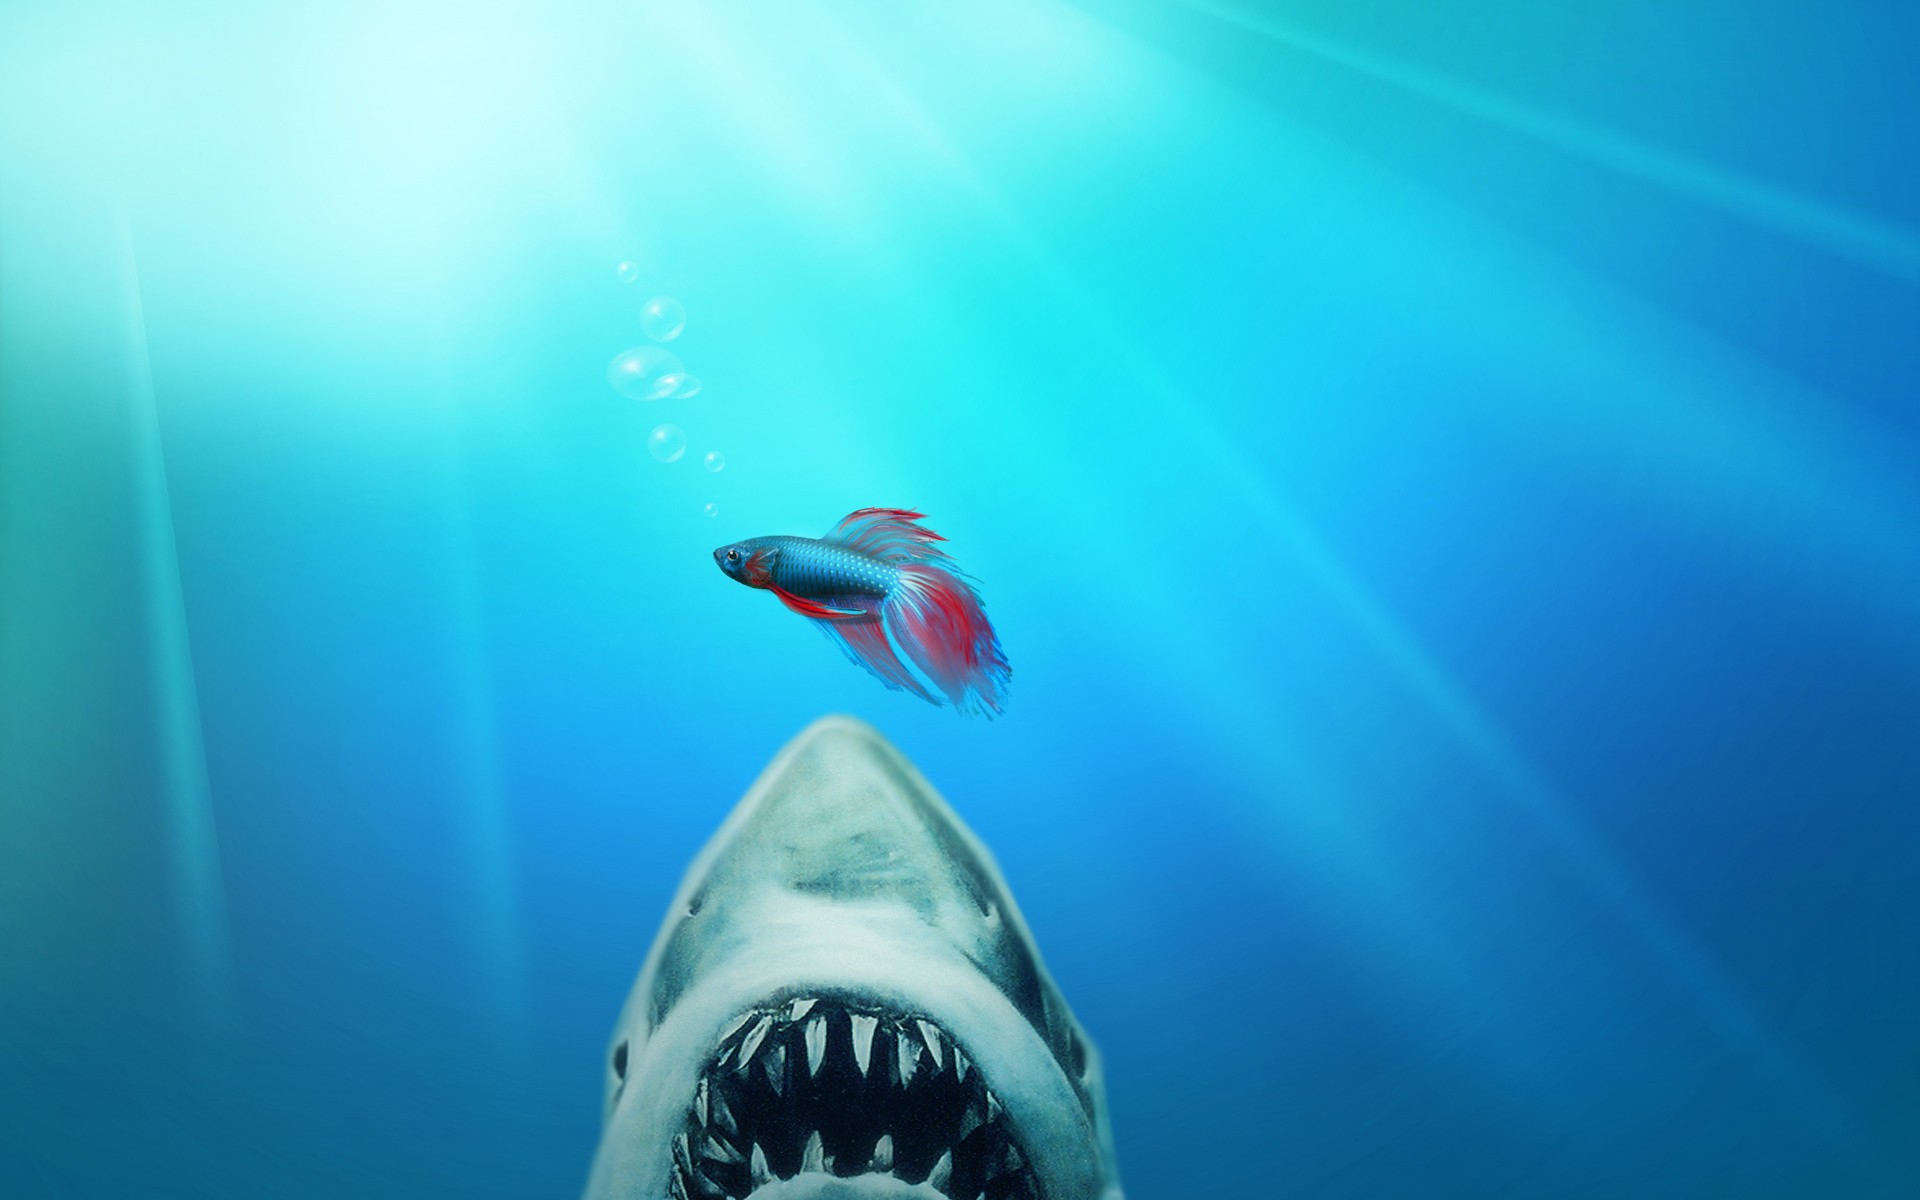 jaws sharks underwater best widescreen background awesome HD Wallpaper 1920x1200